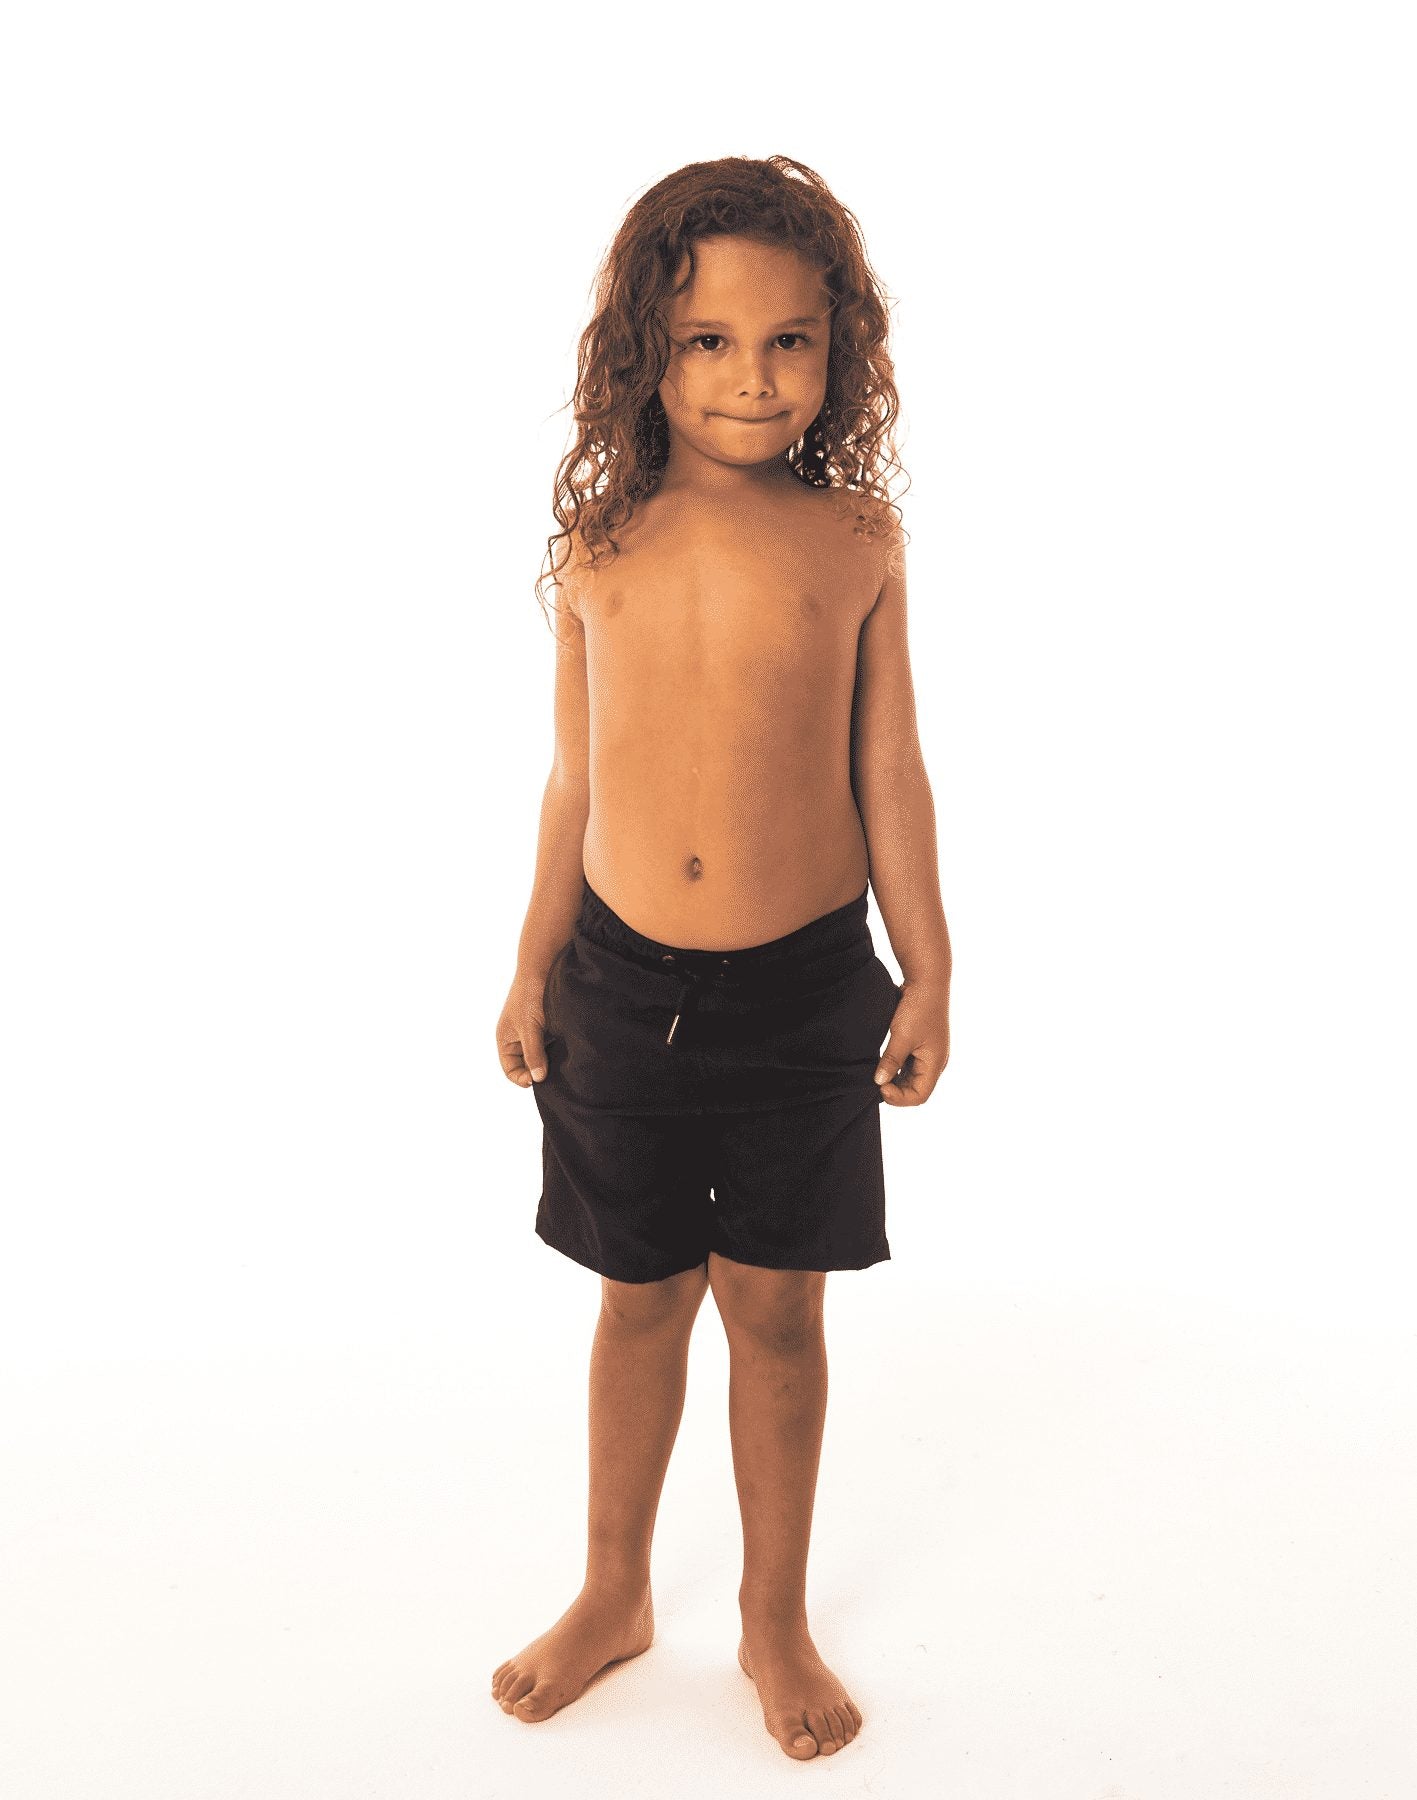 Eco-Friendly Navy Blue Kids' Shorts by SevenC's - Full View on model